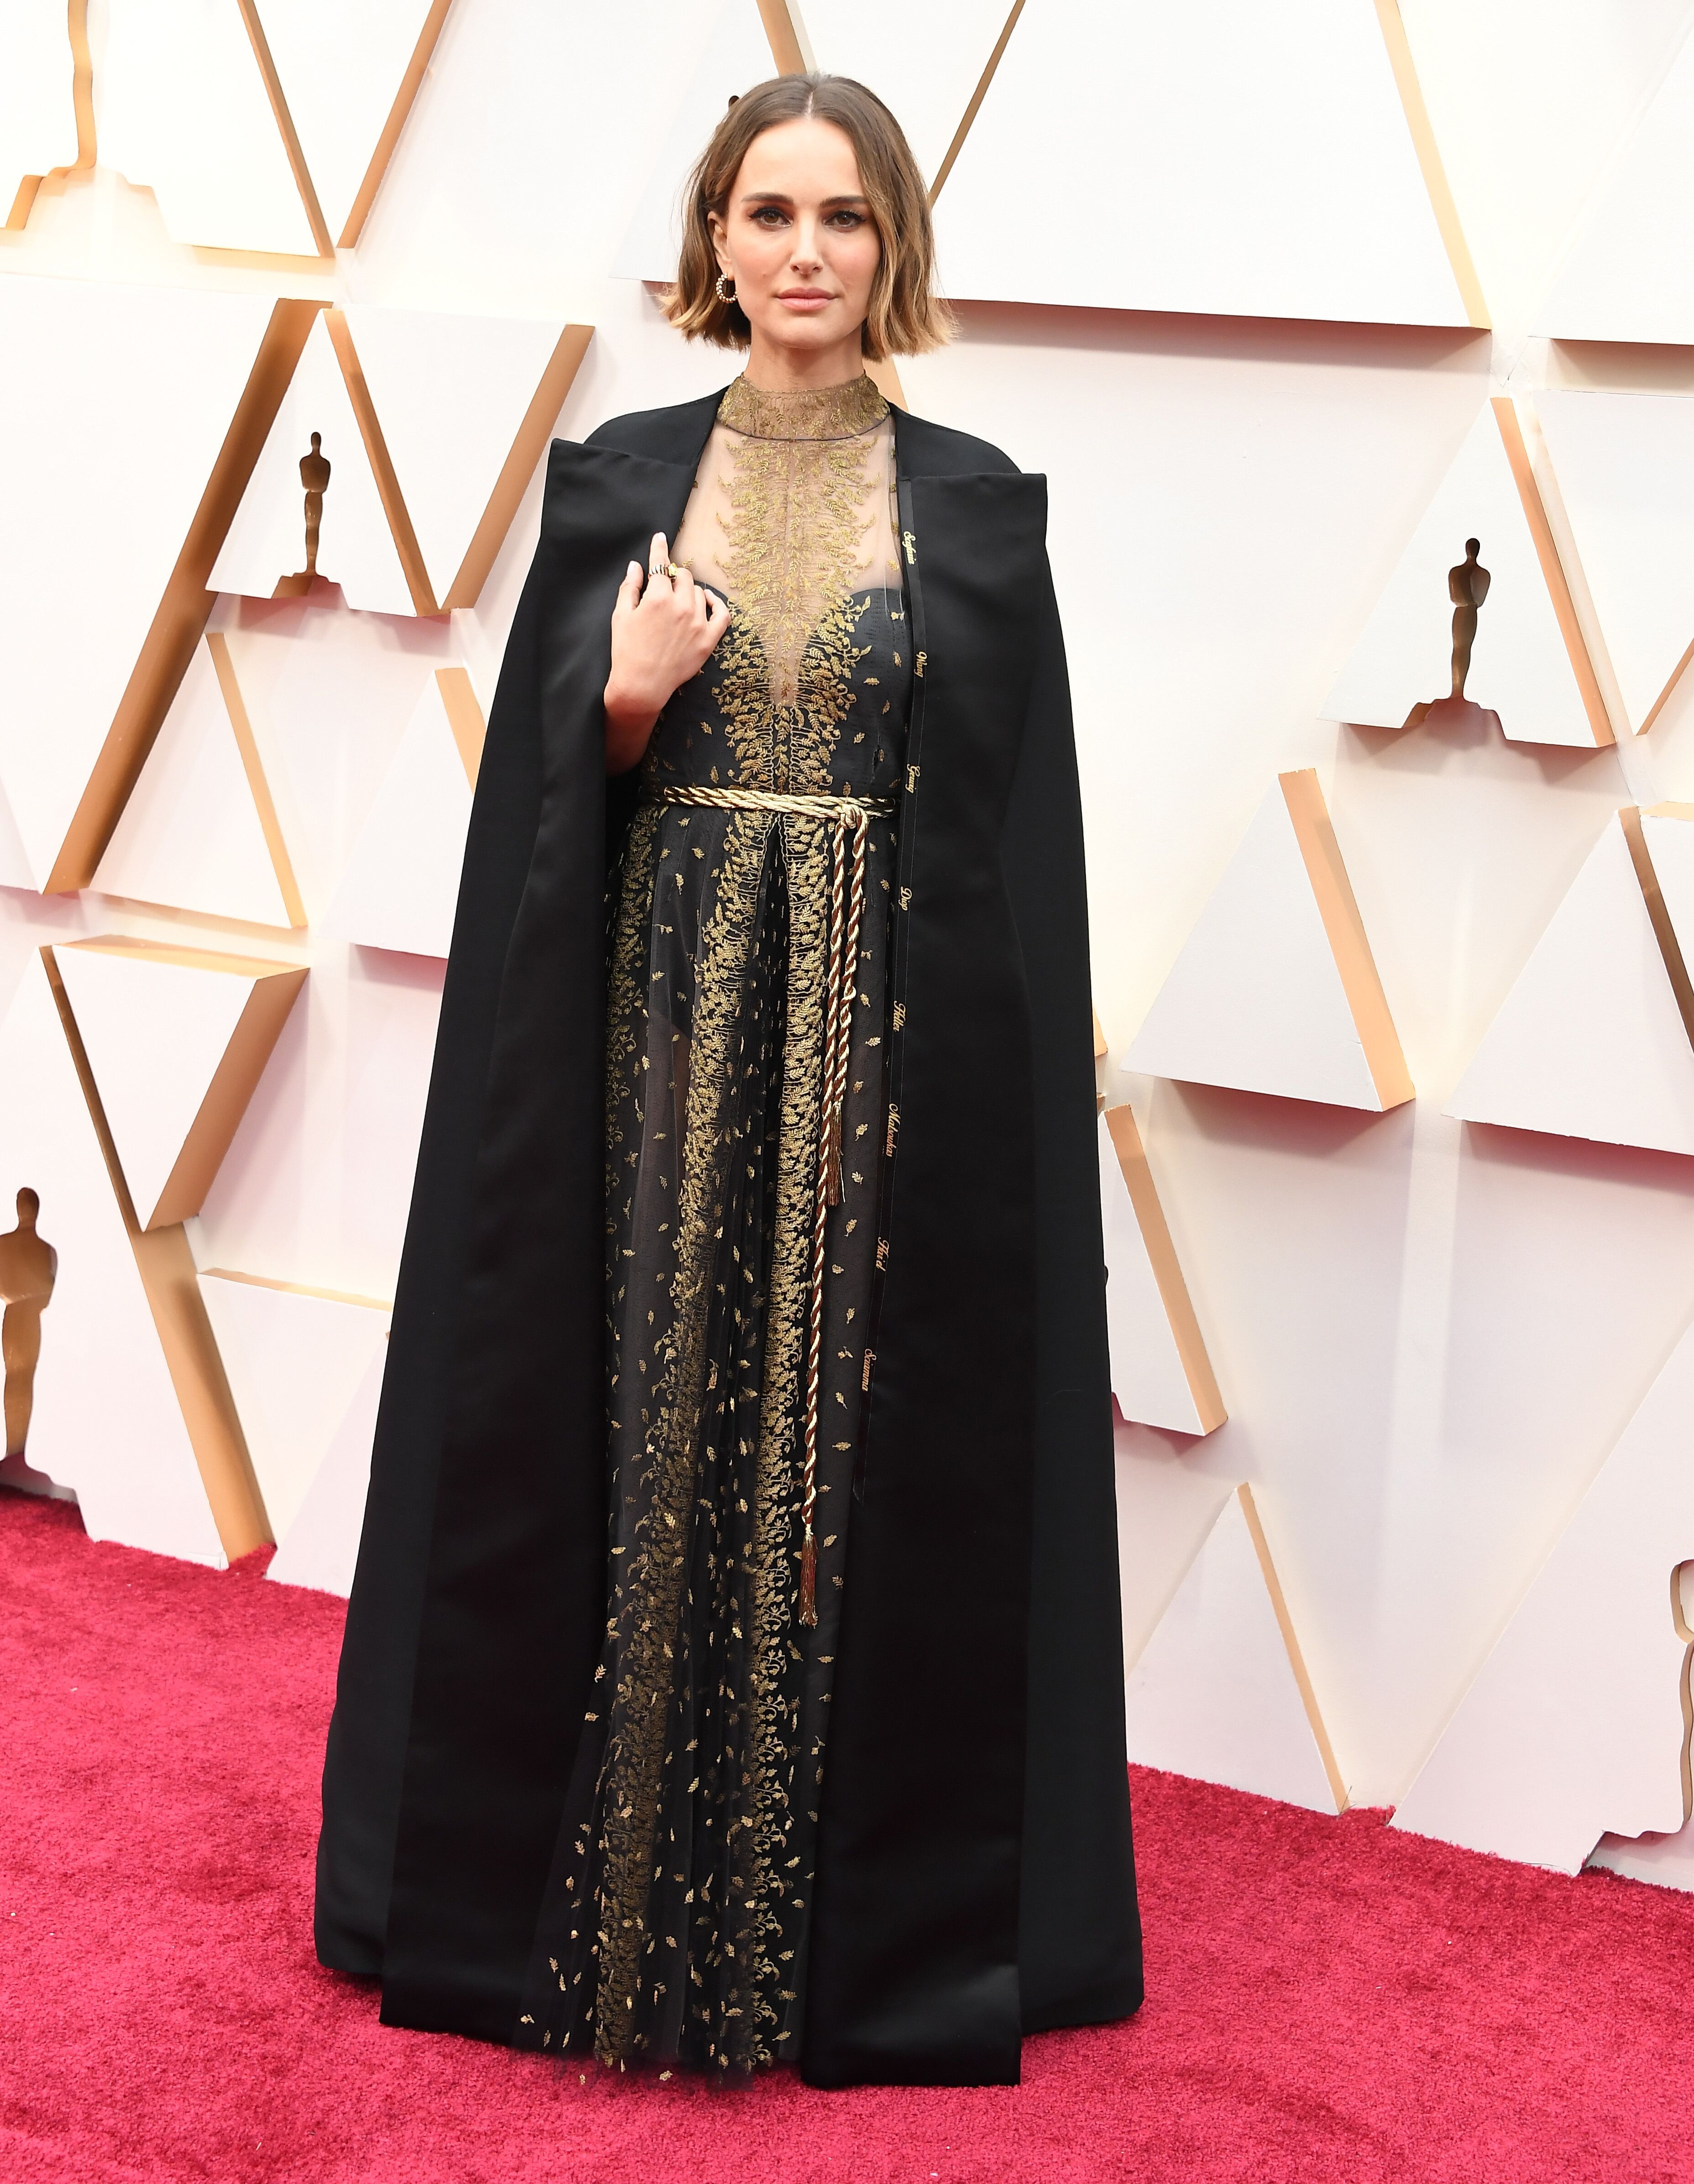 Oscar-winning actress Natalie Portman on the red carpet for the 92nd Academy Awards| Source: Getty Images